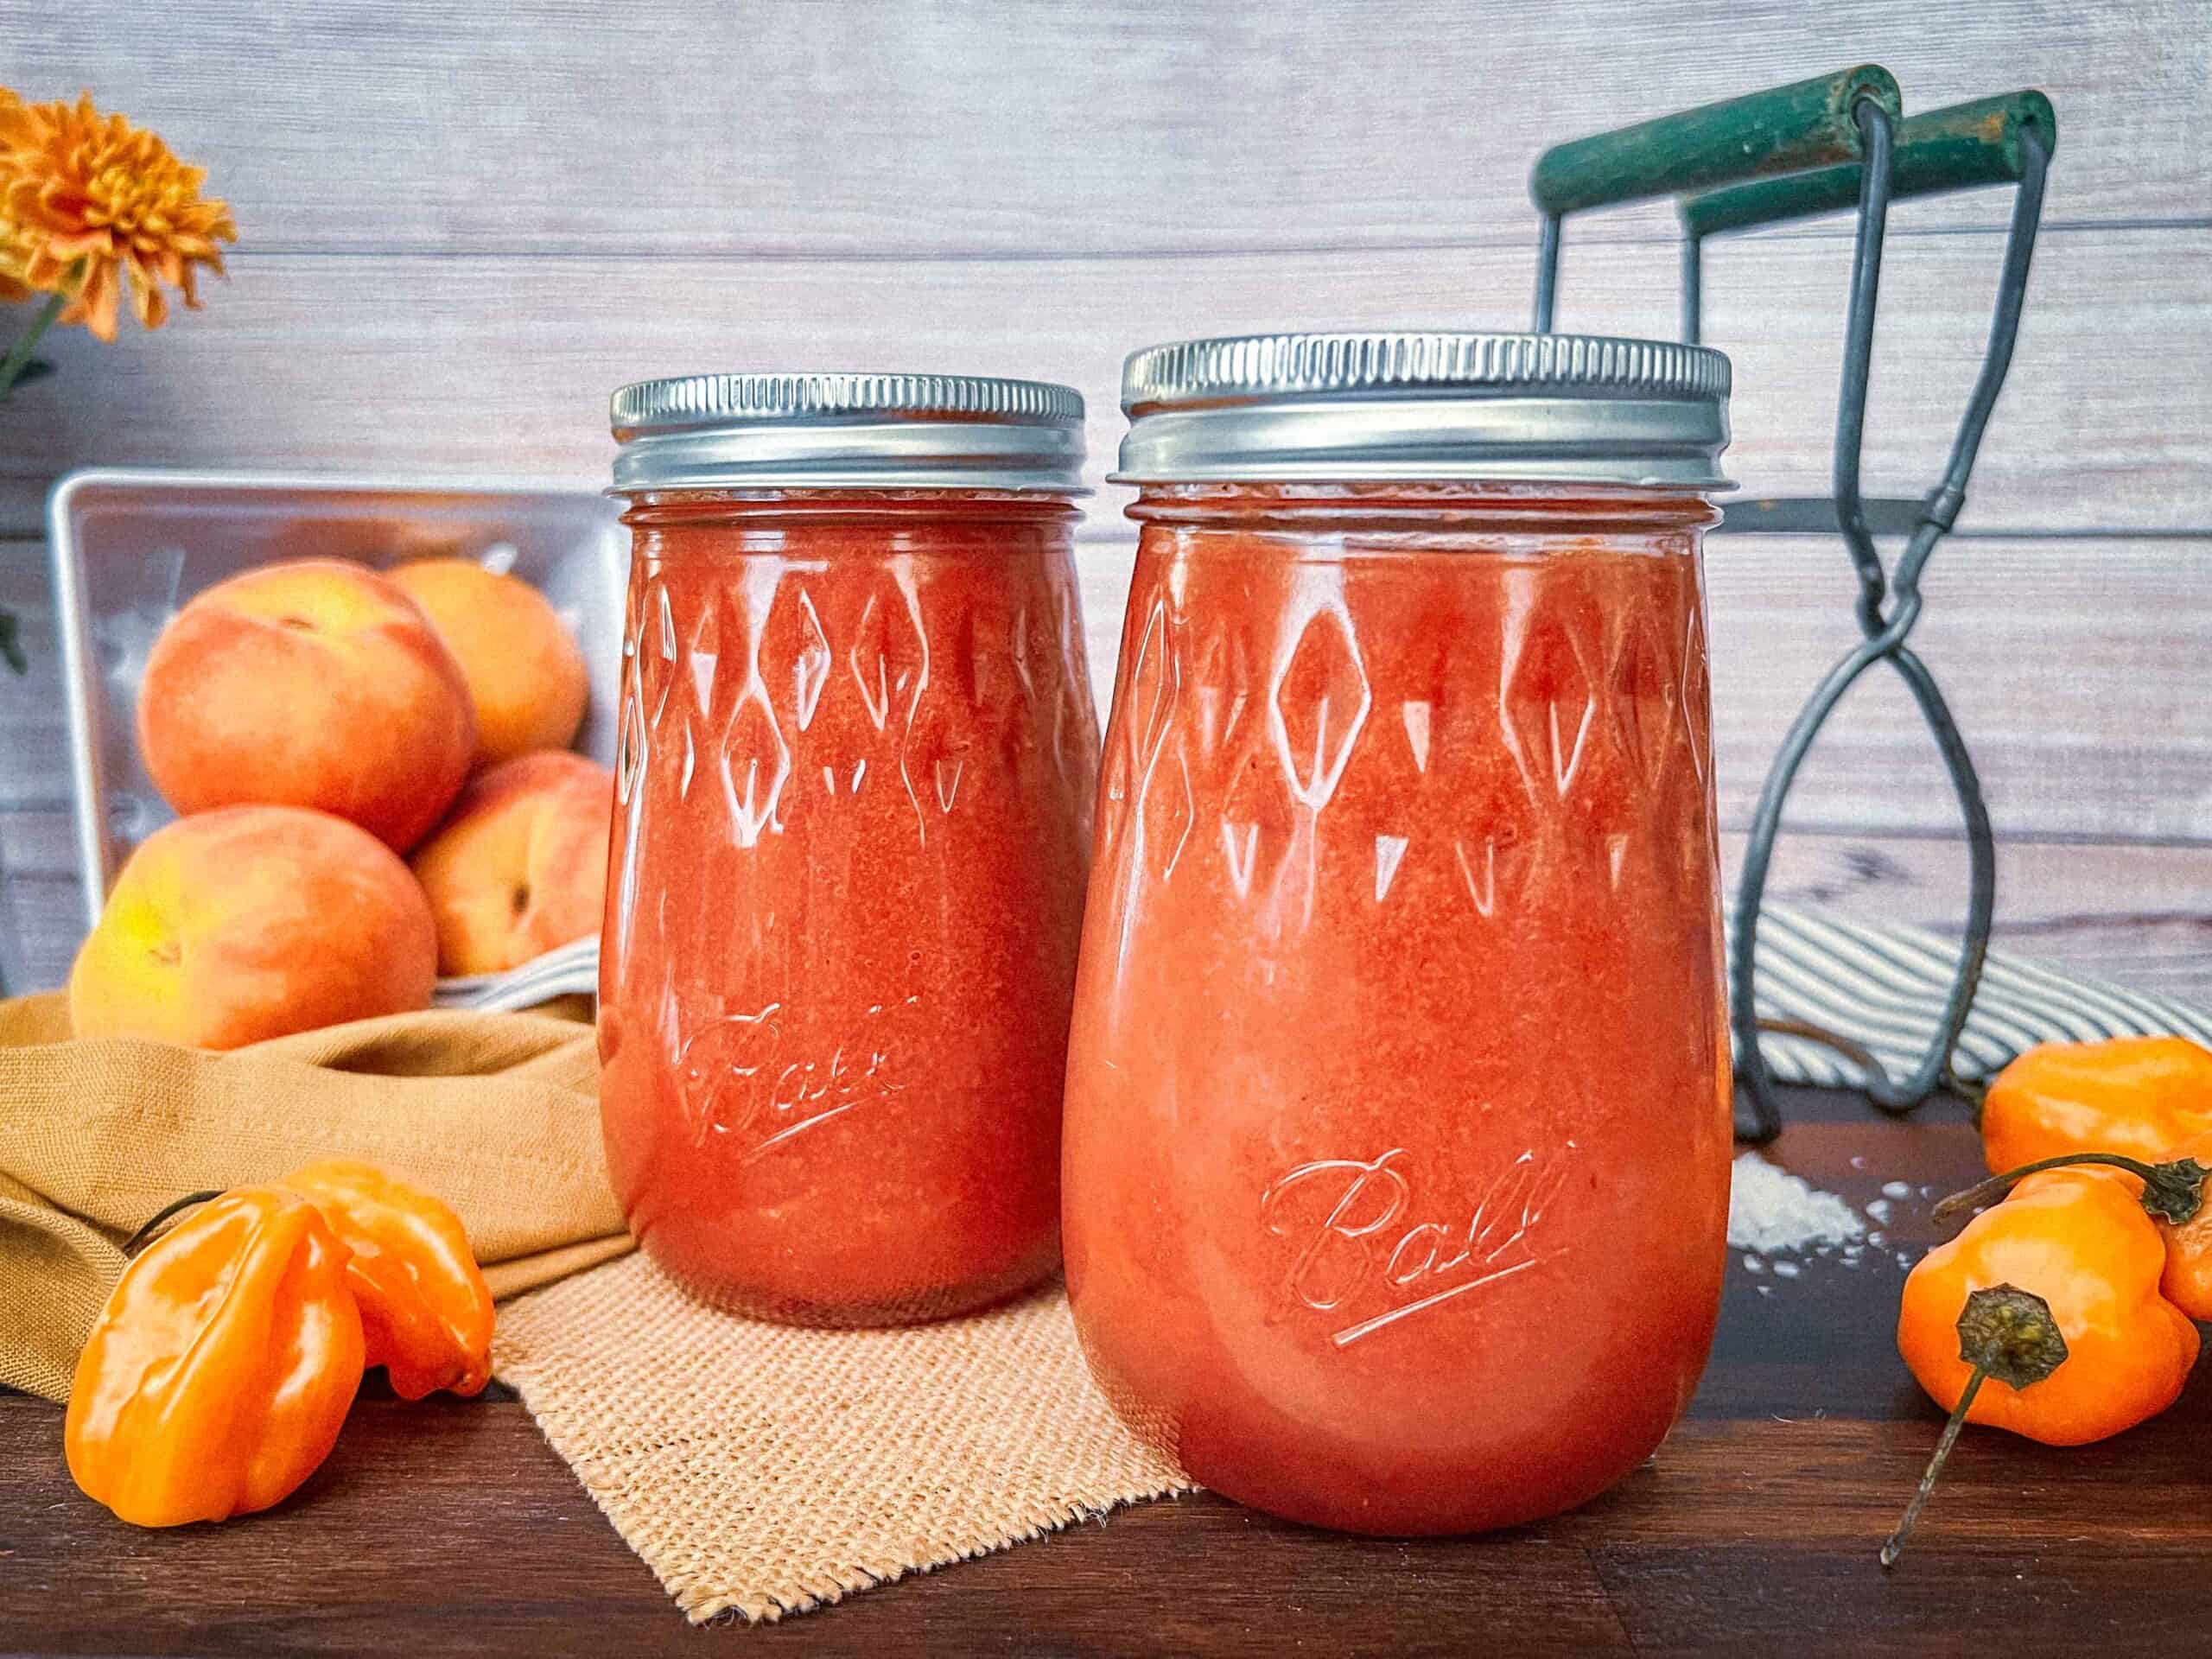 Smoked peach habanero hot sauce in jars with salt, peppers, peaches on a wooden cutting board.